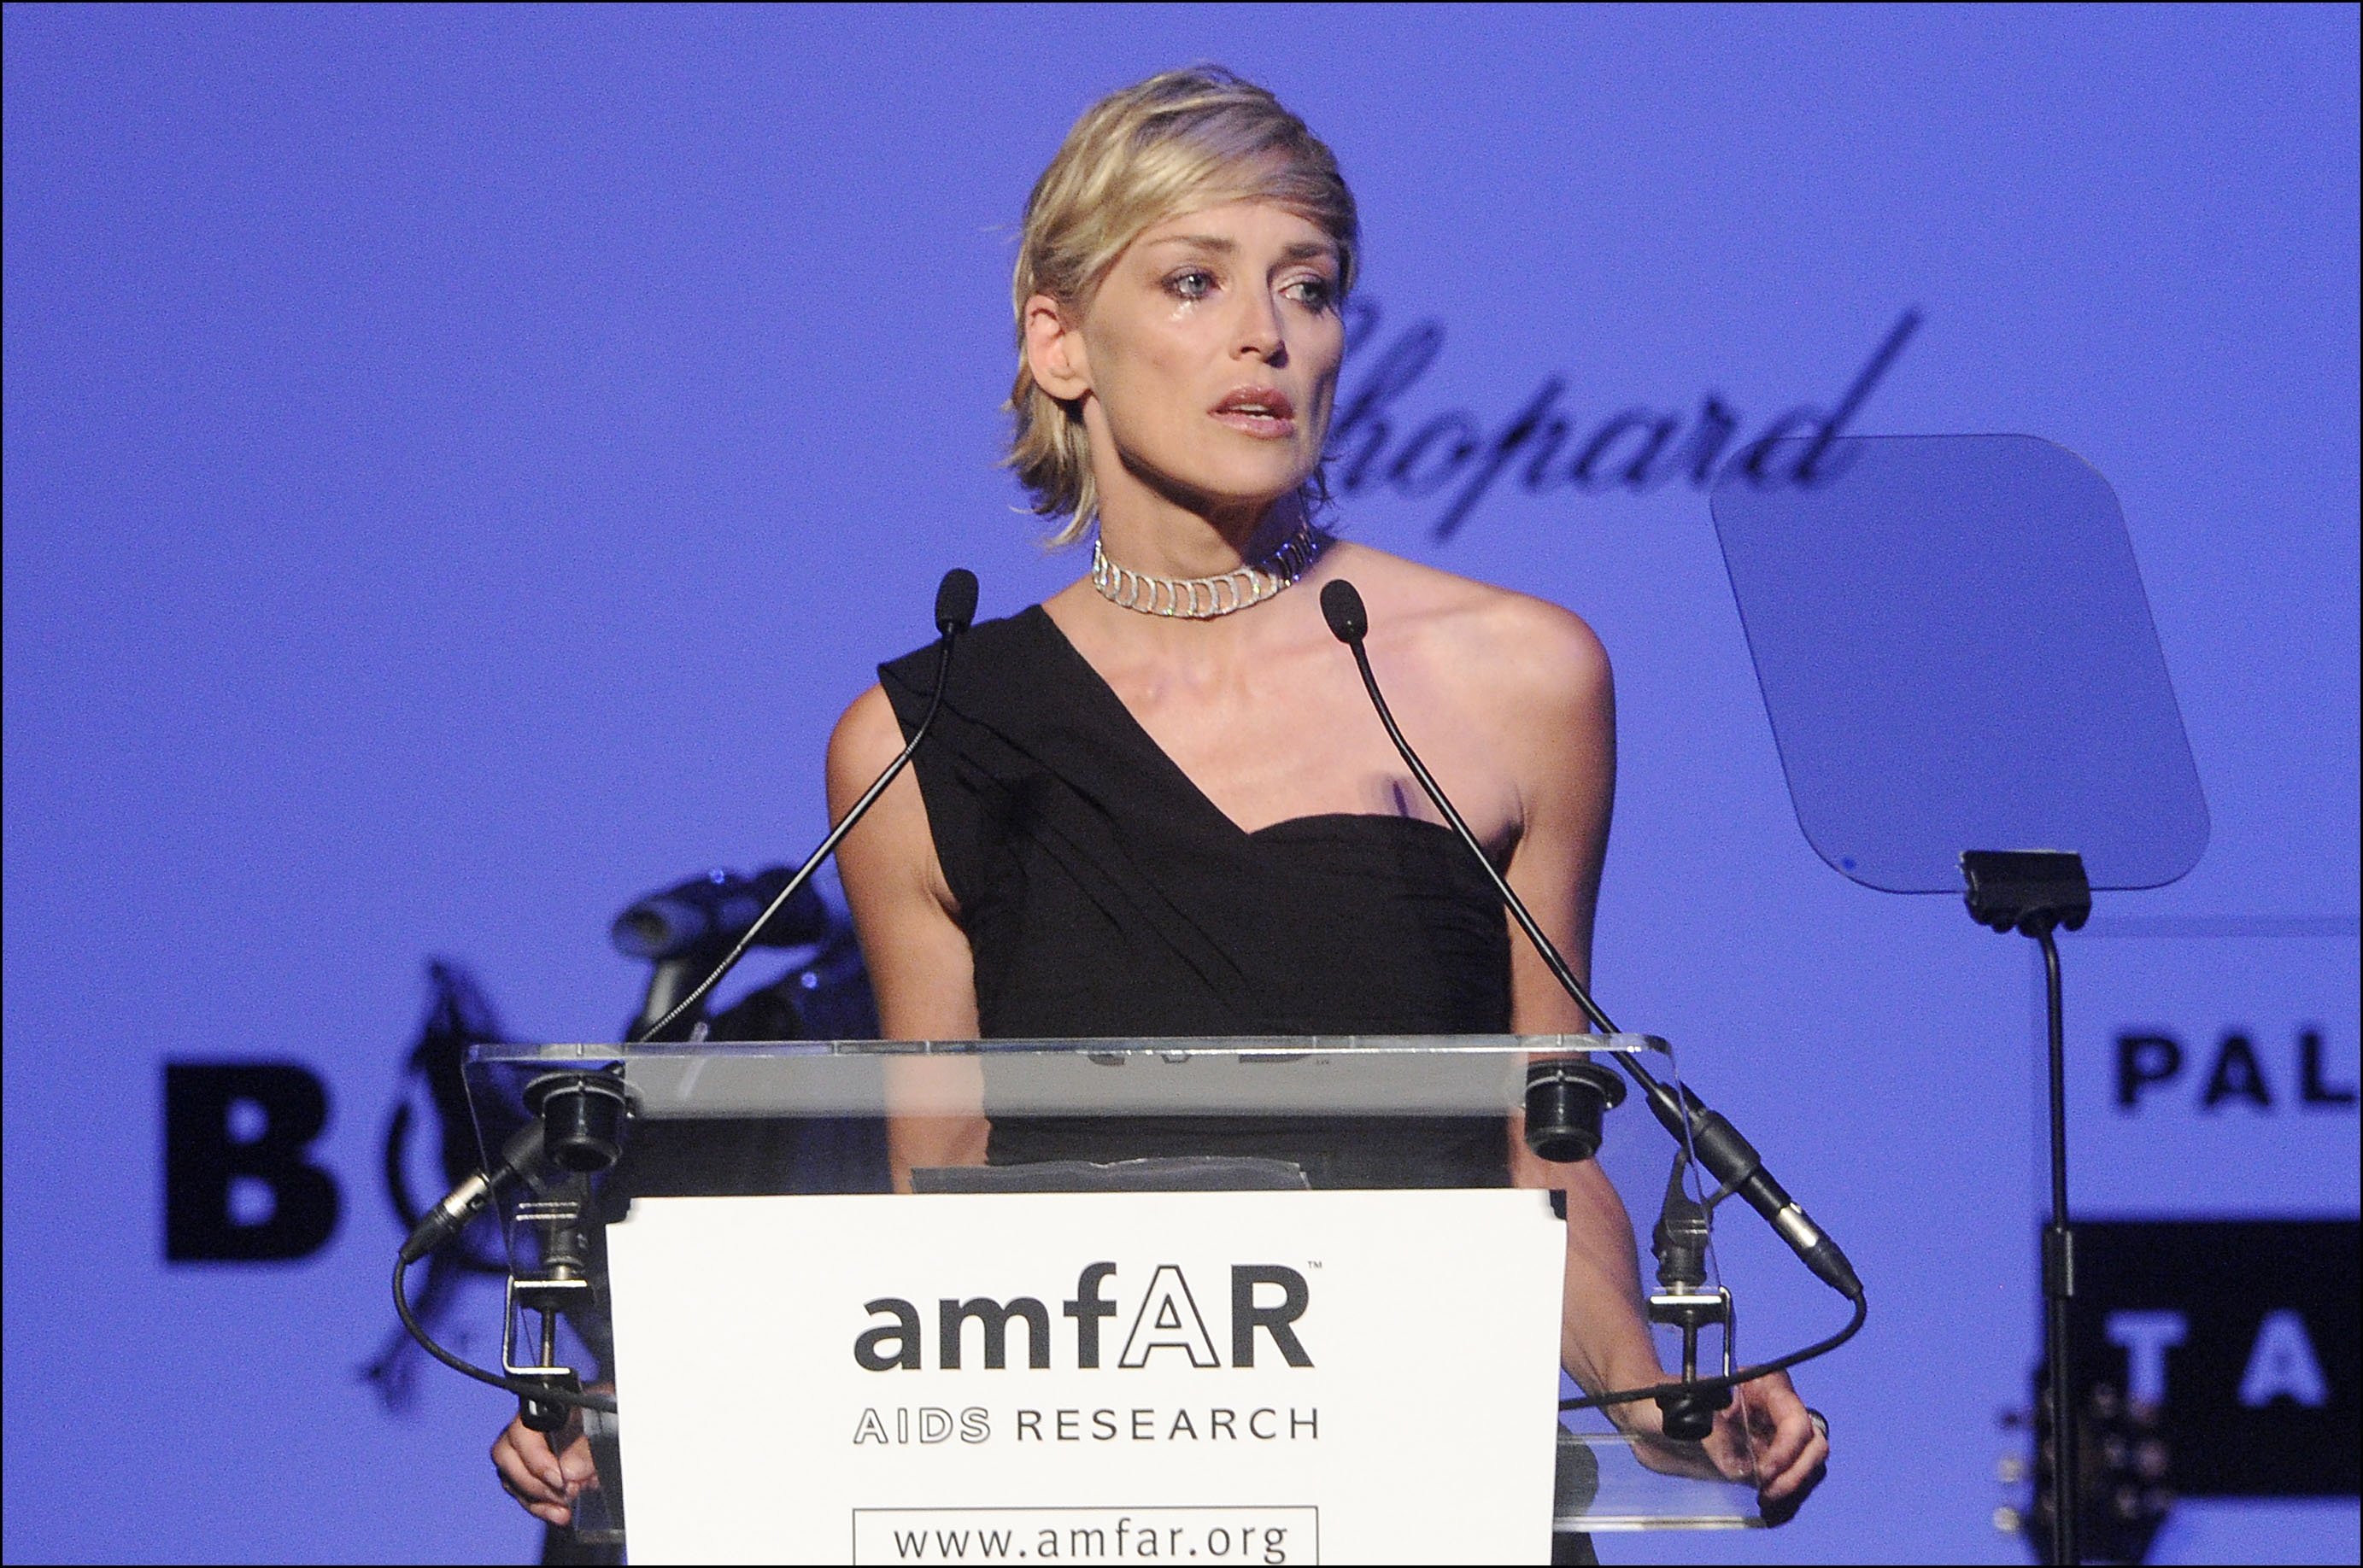 The "Casino" actress Sharon Stone during her 2009 speech in amfAR Cinema Against Aids gala in France. | Photo: Getty Images